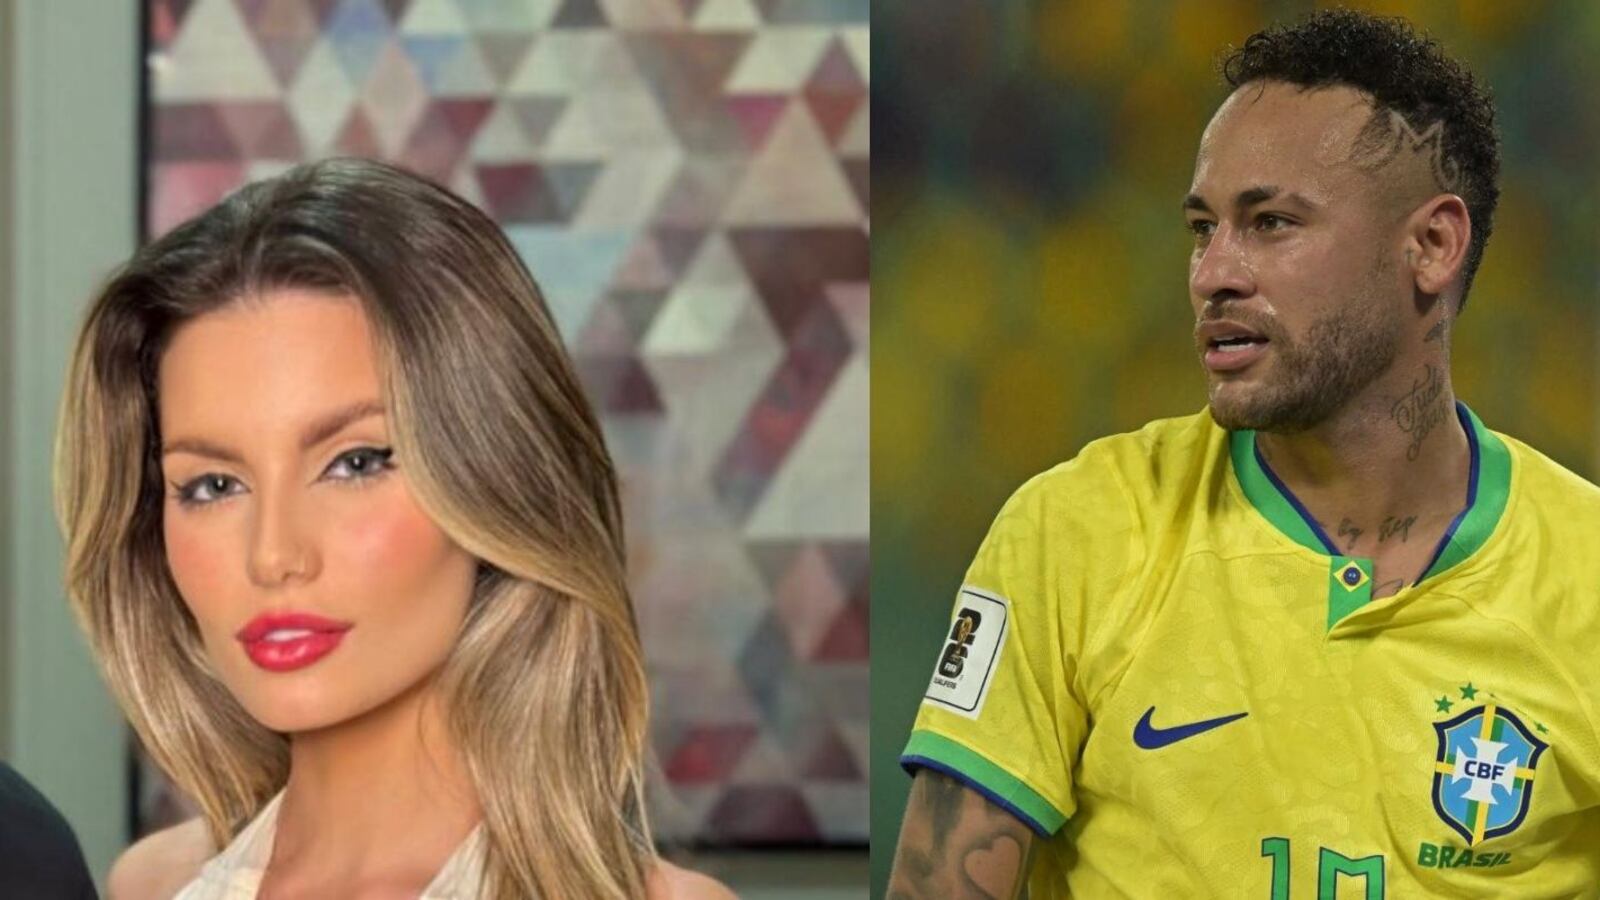 The silence was broken by the response of the woman accused of being with Neymar